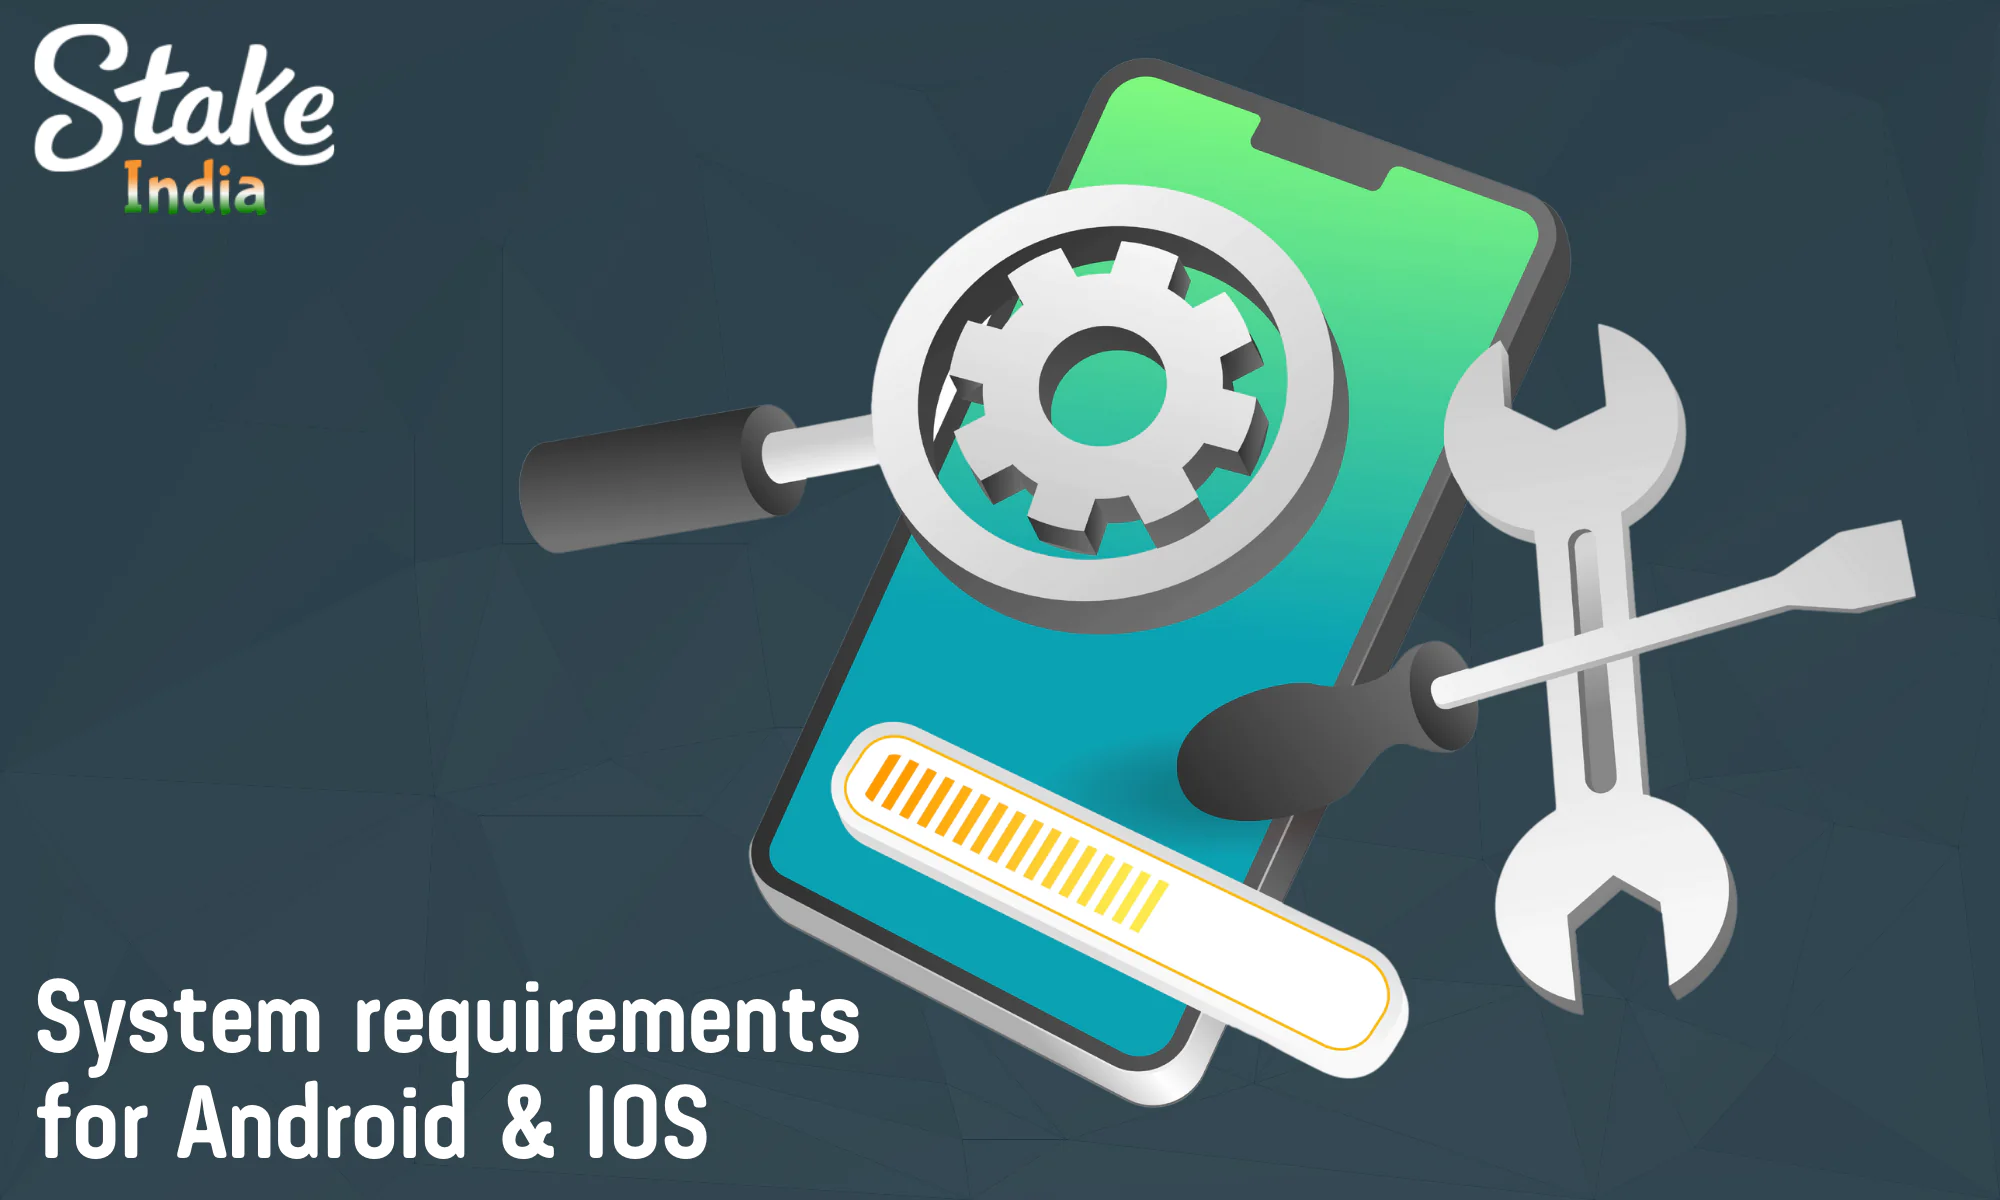 List of system requirements for Android and IOS